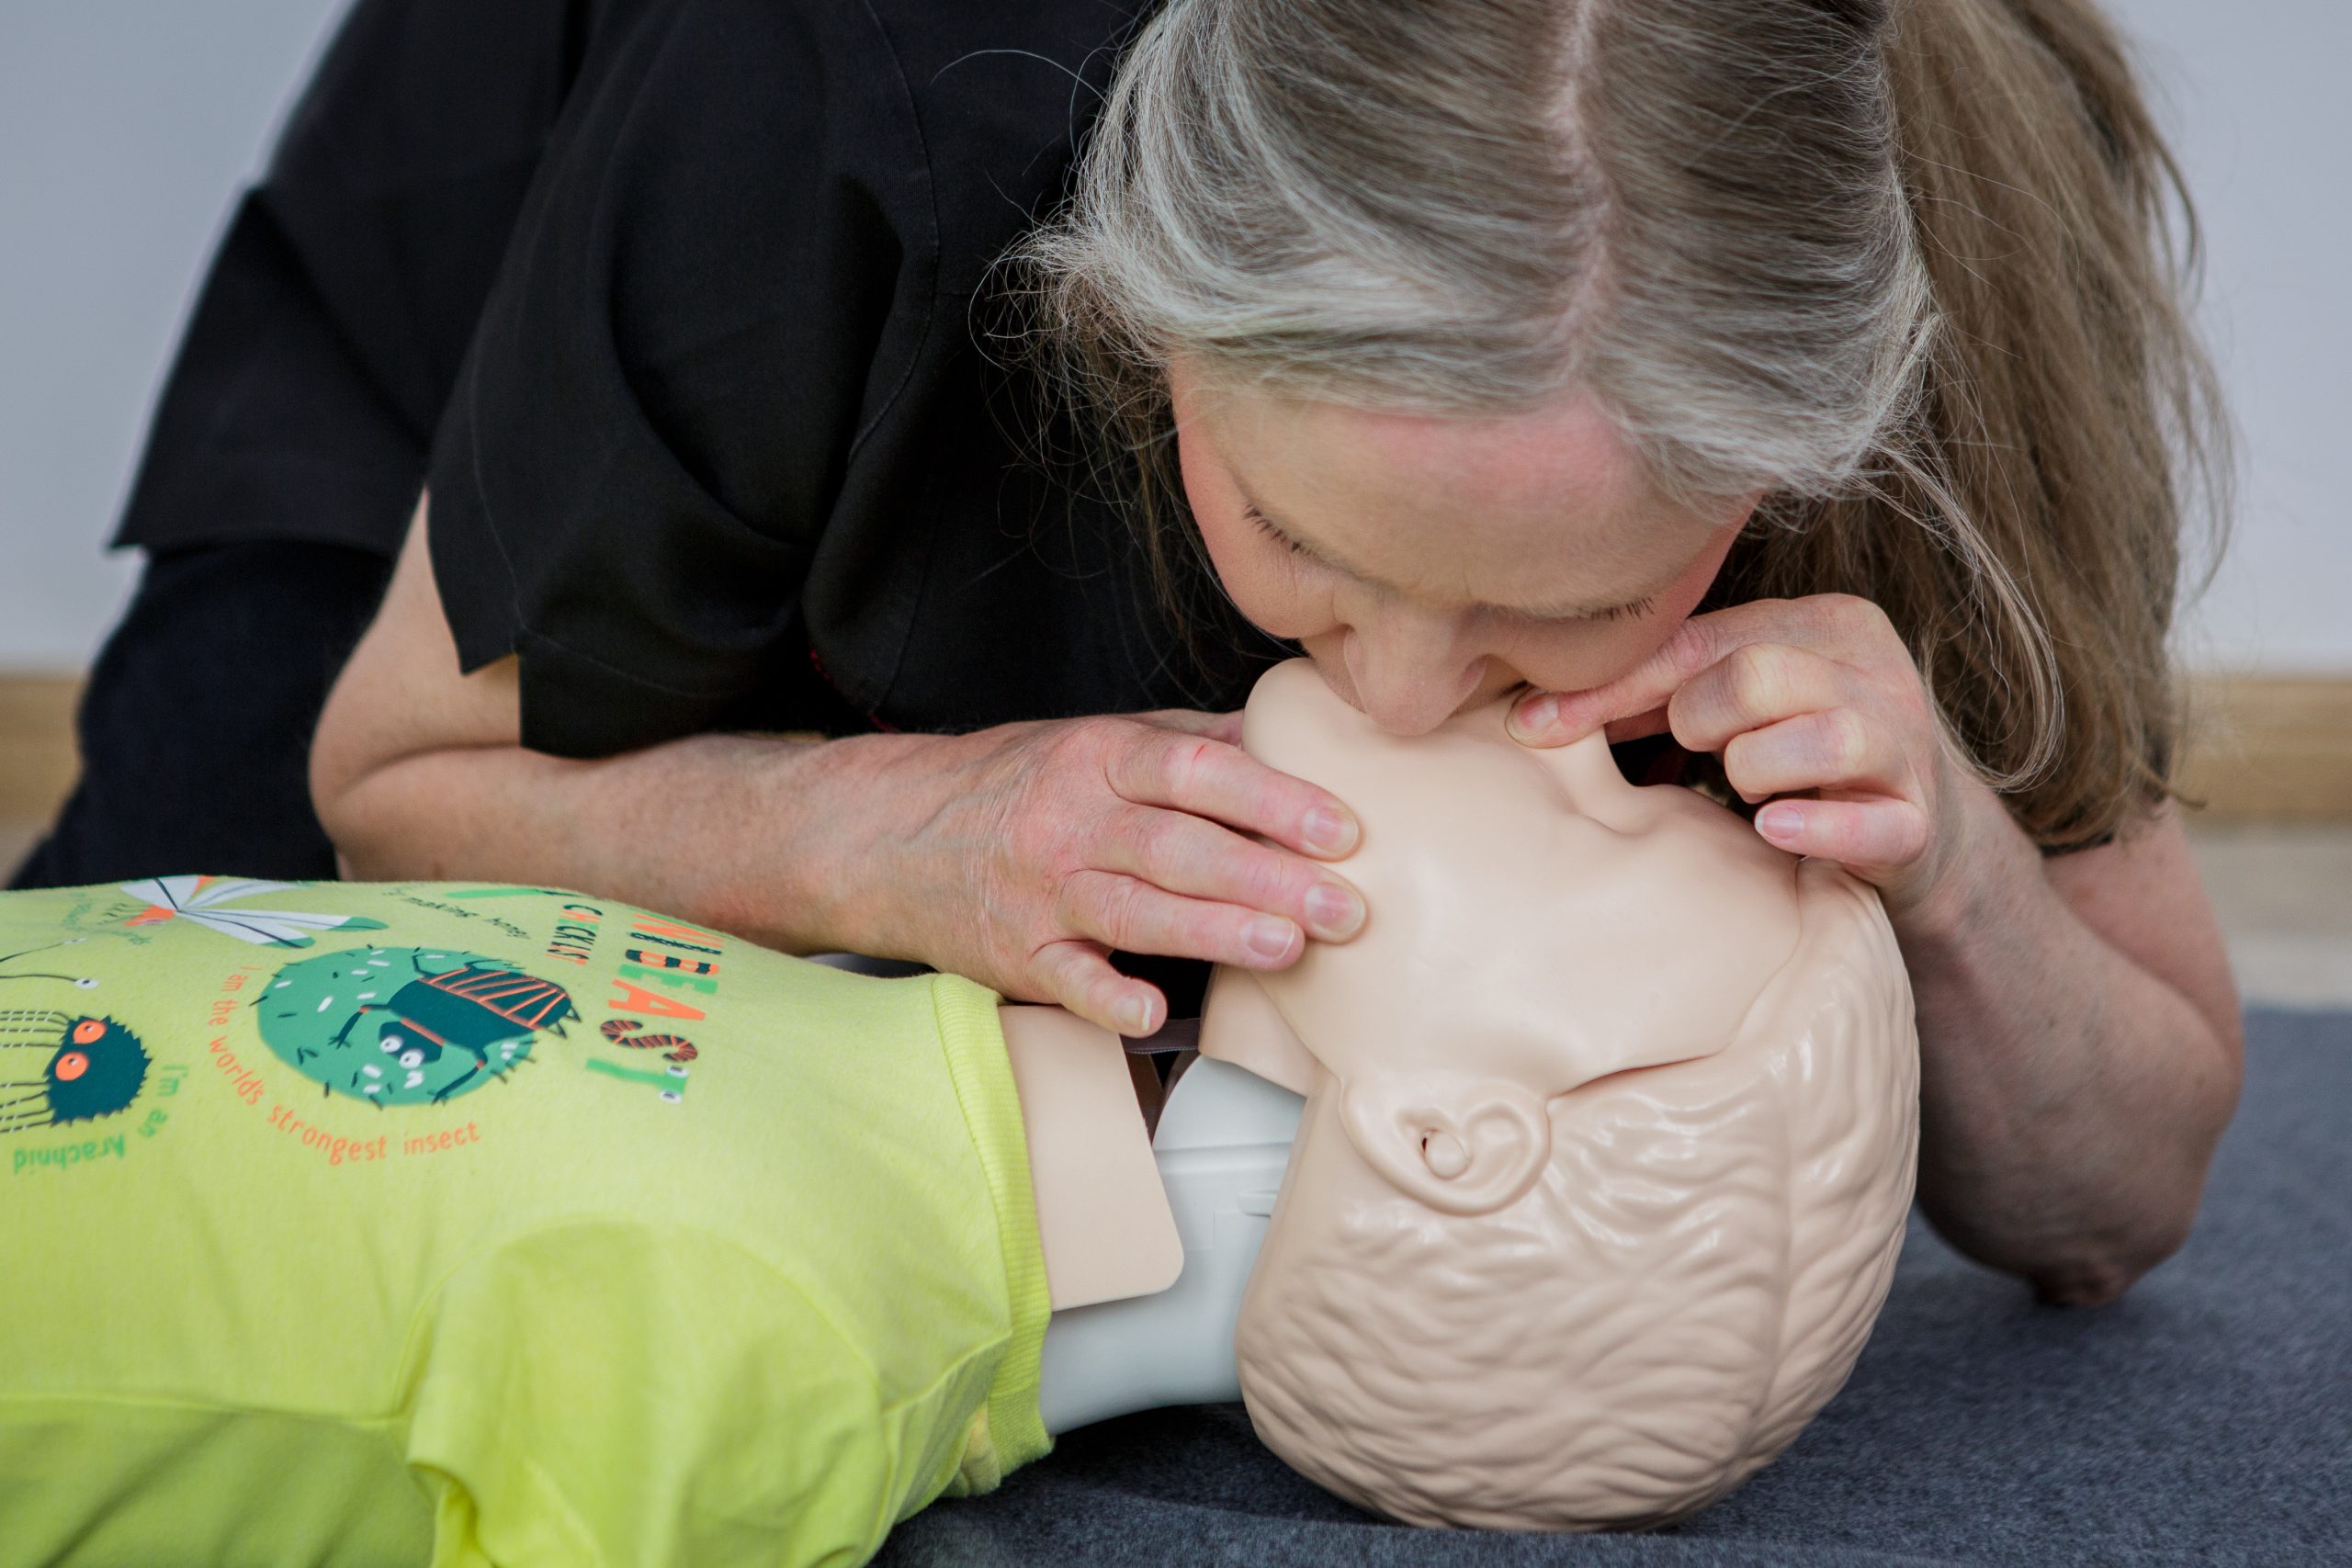 Karen carrying out rescue breaths on a child manikin for child first aid. The child manikin is wearing a yellow t-shirt.